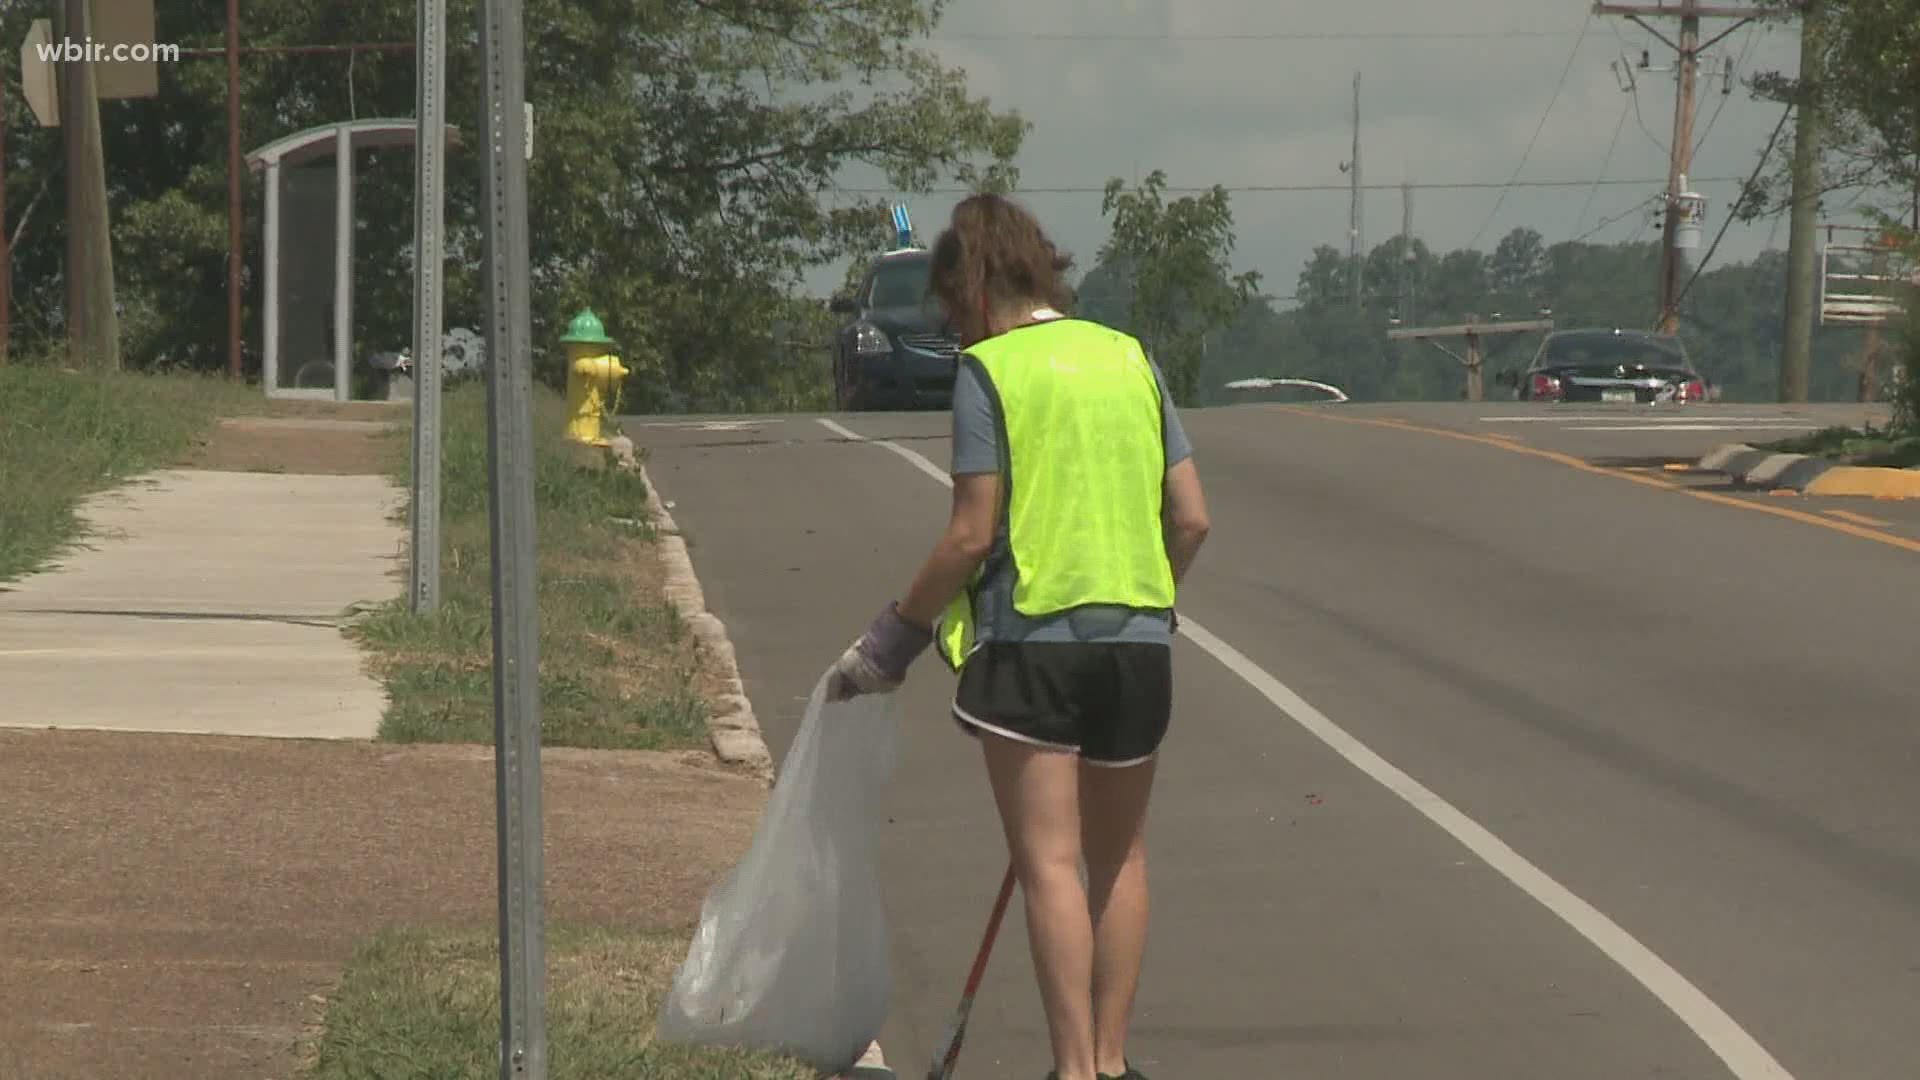 Keeping Knoxville clean is hard work and one group took to the streets of North Knoxville today to help out.